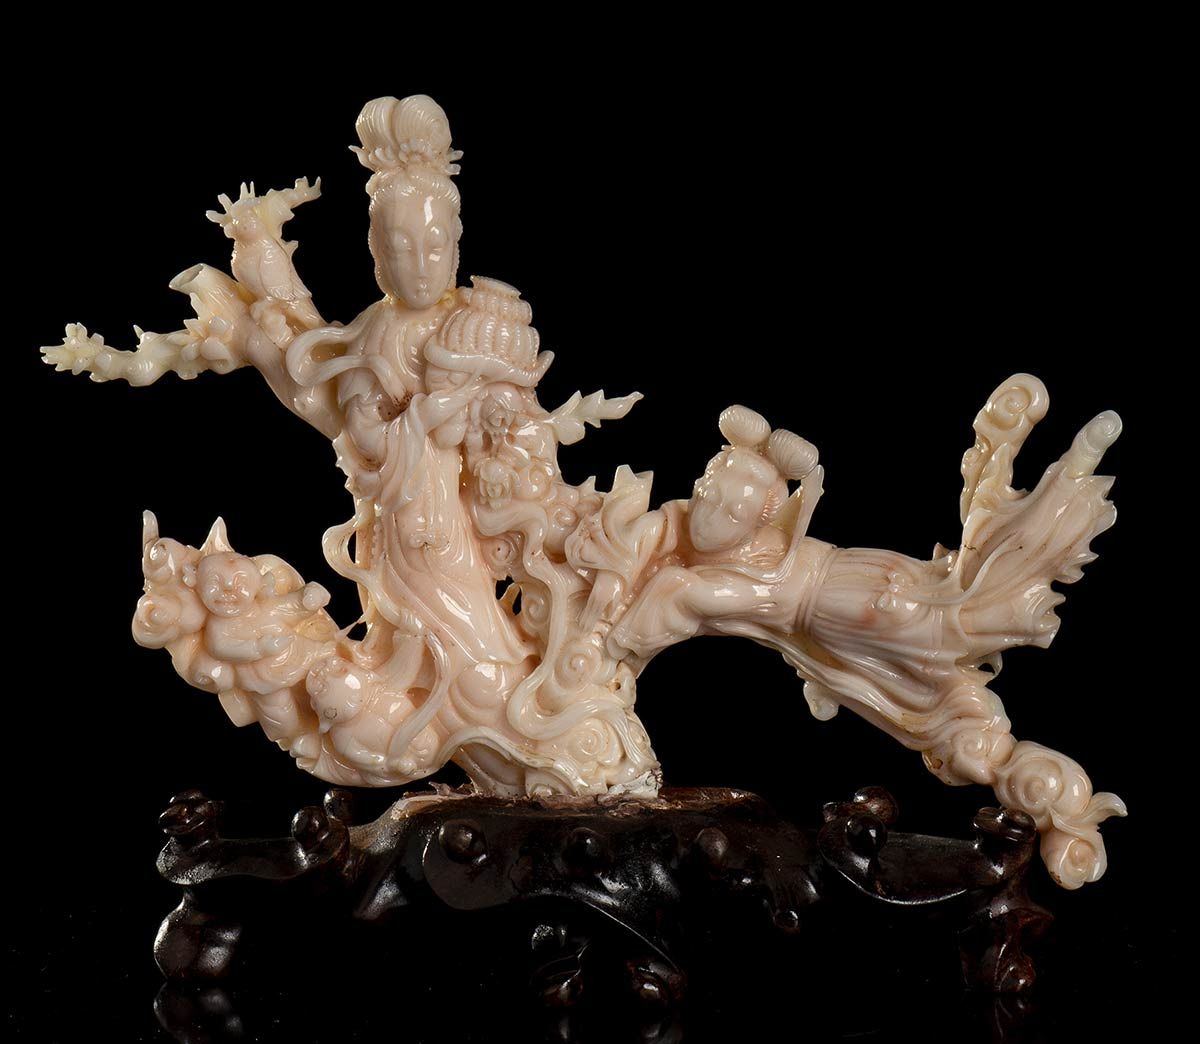 A PINK CORAL GROUP WITH FEMALE FIGURES A PINK CORAL GROUP WITH FEMALE FIGURES.

&hellip;